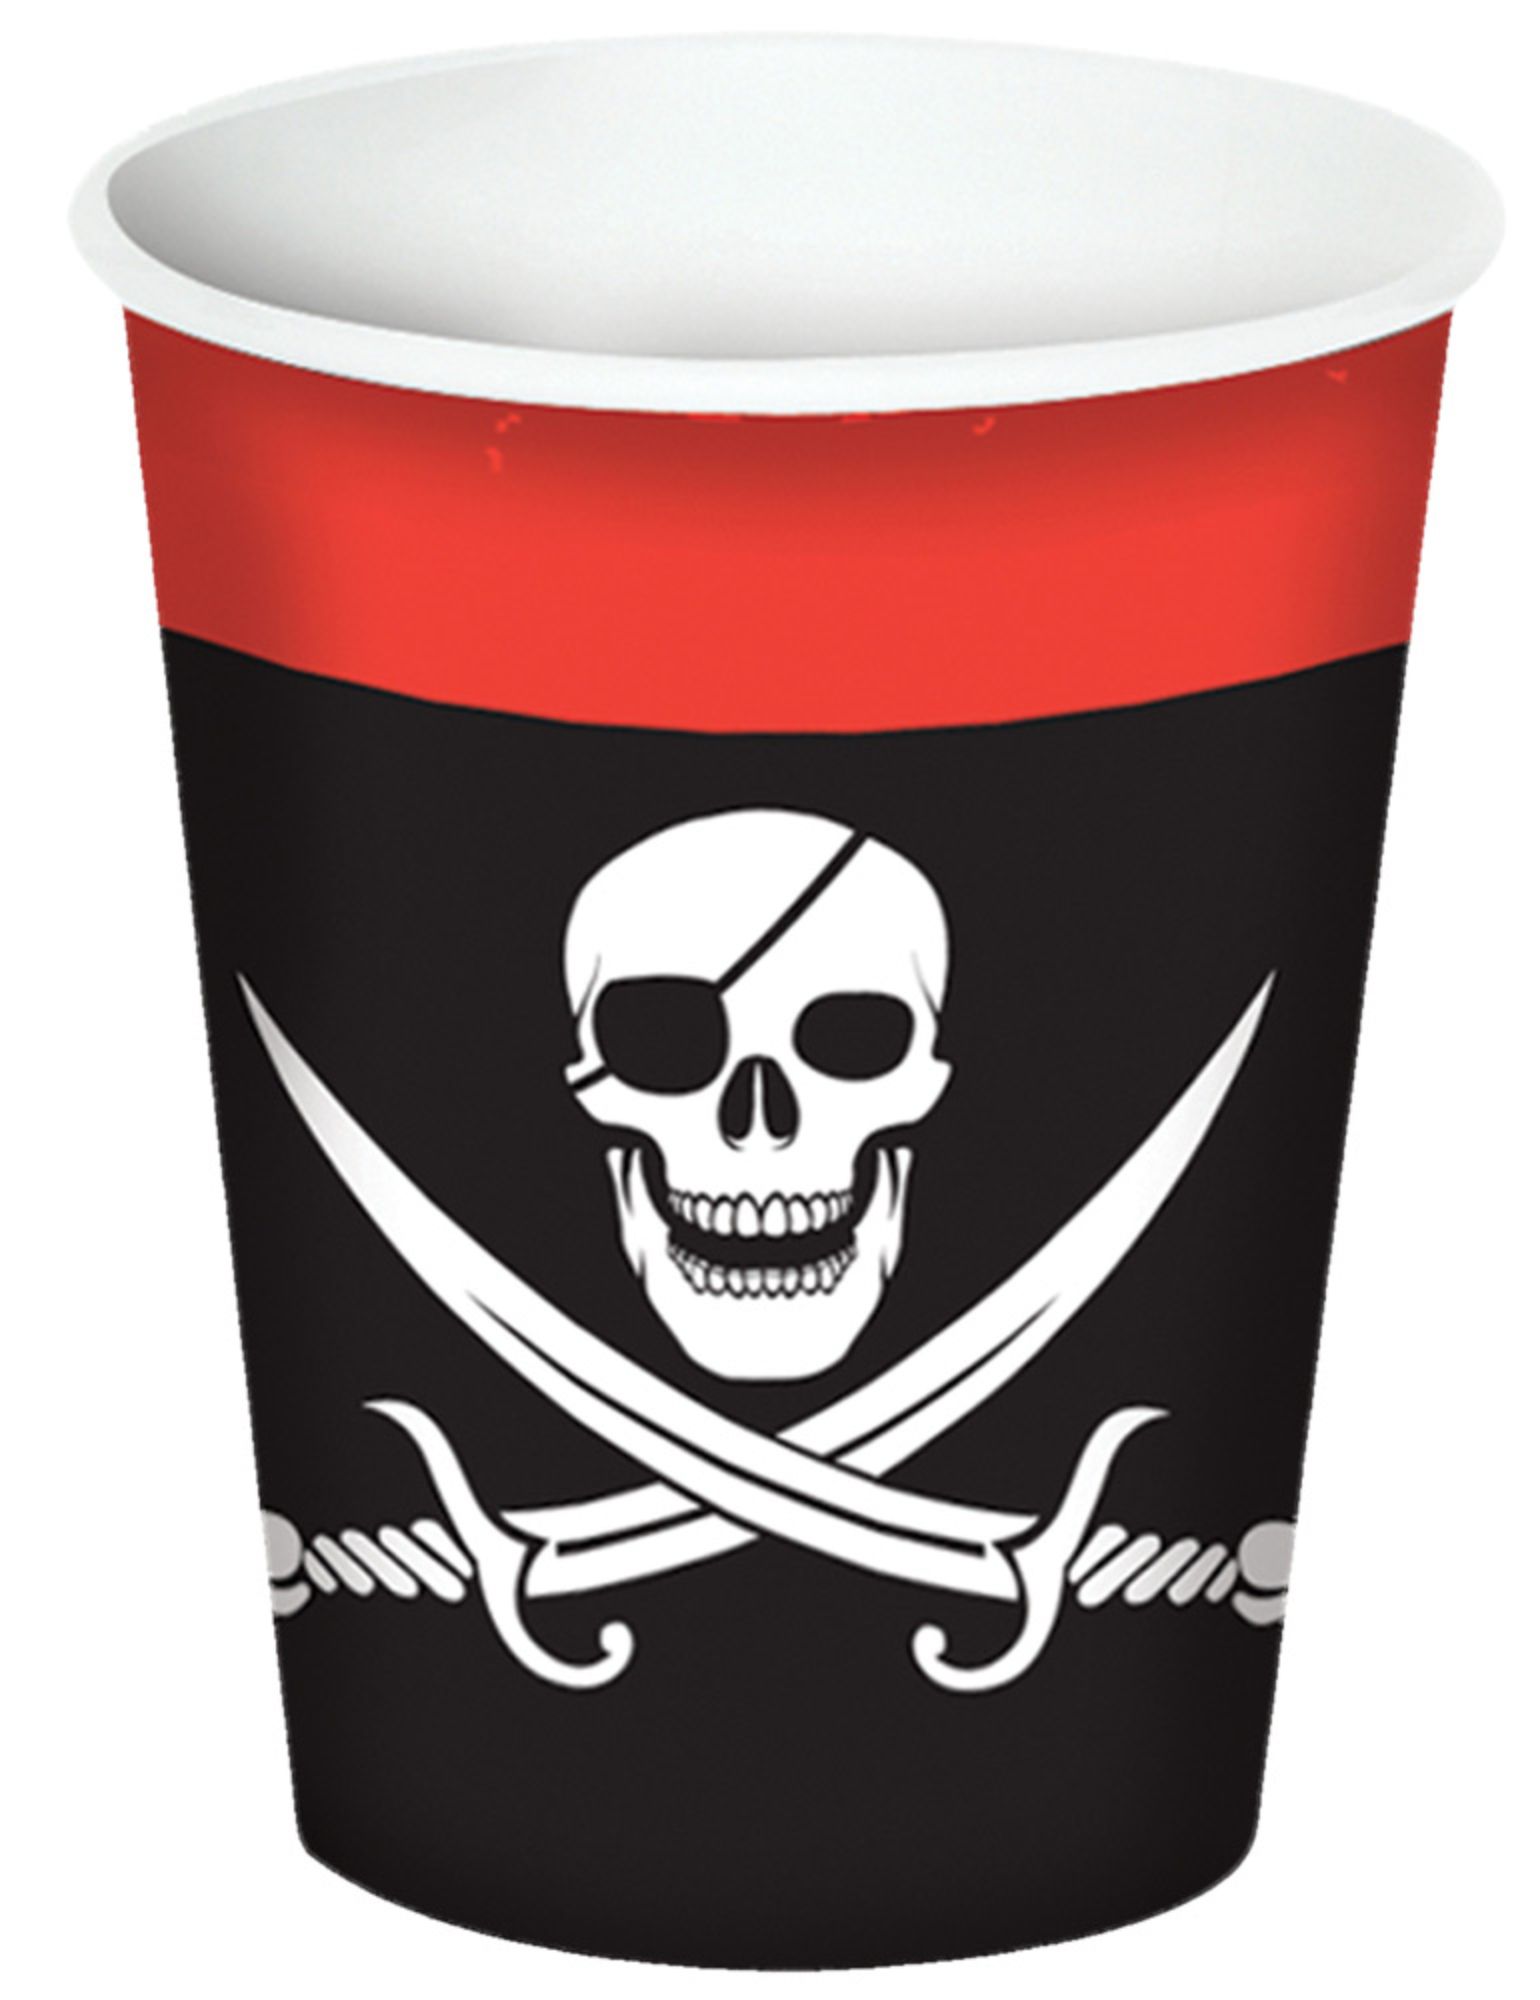 The Costume Center Pack of 8 Black and White Pirate Beverage Cups 9 oz.